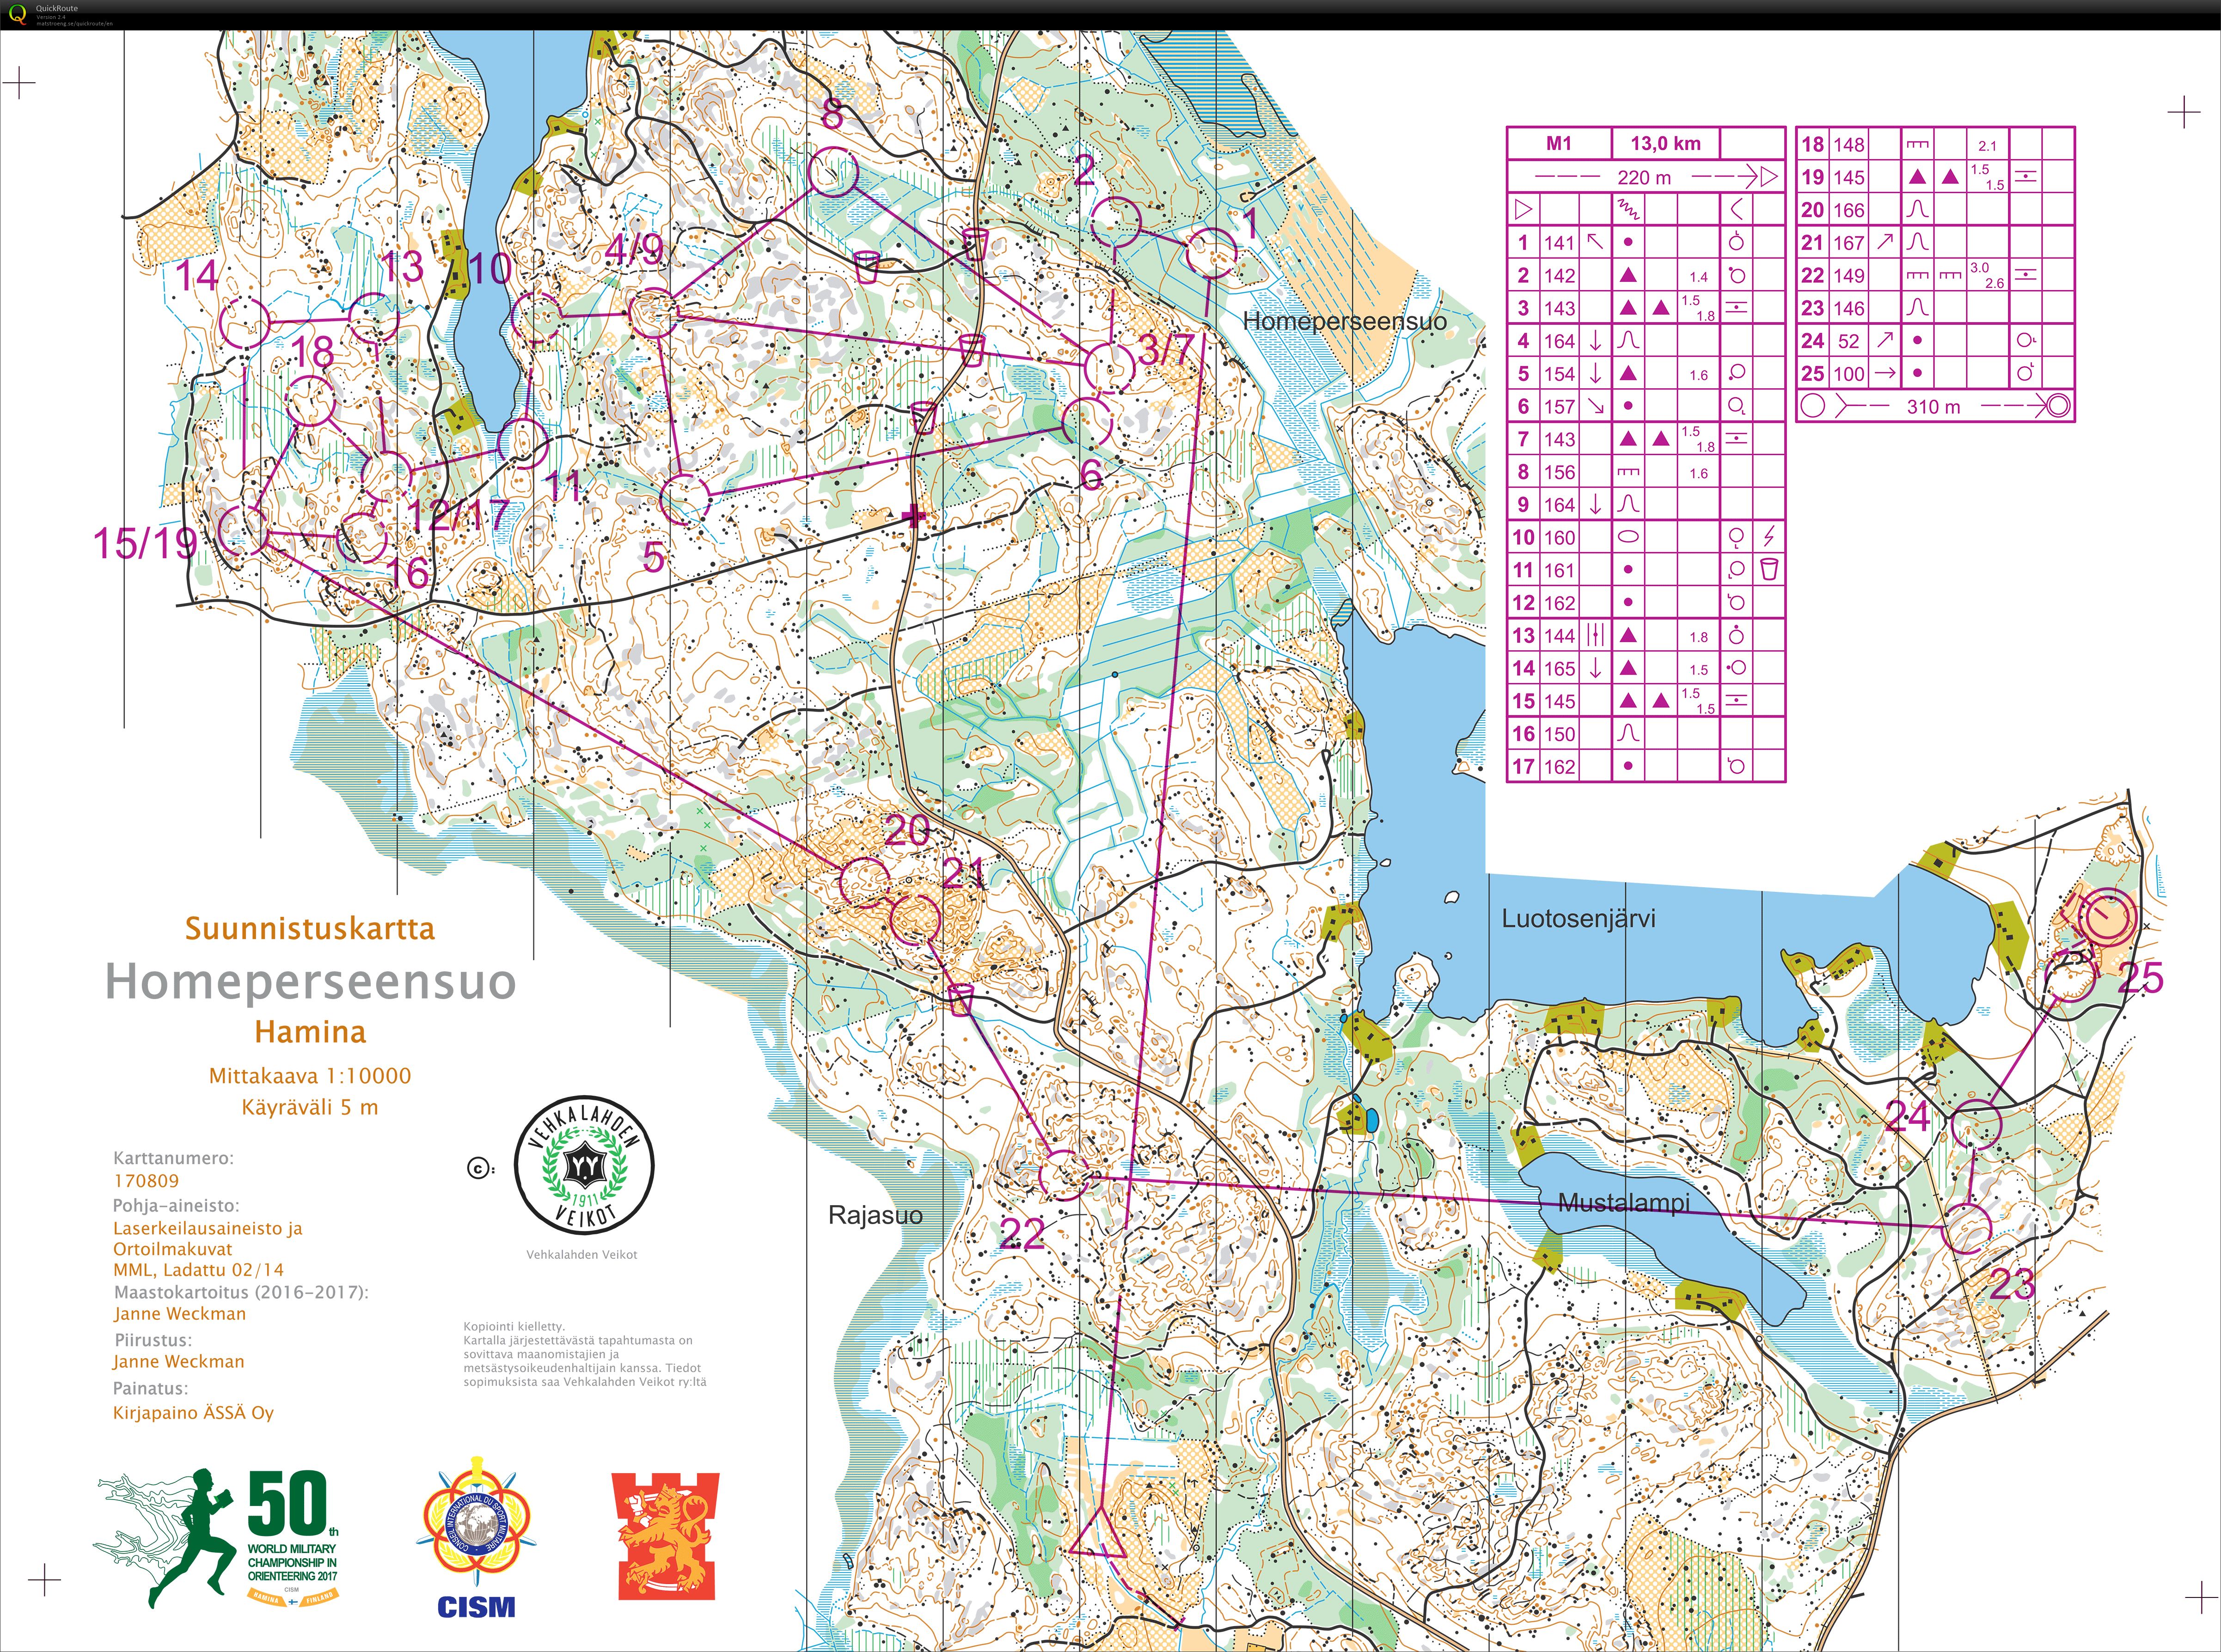 CISM World Military Orienteering Championships | Long (13-06-2017)